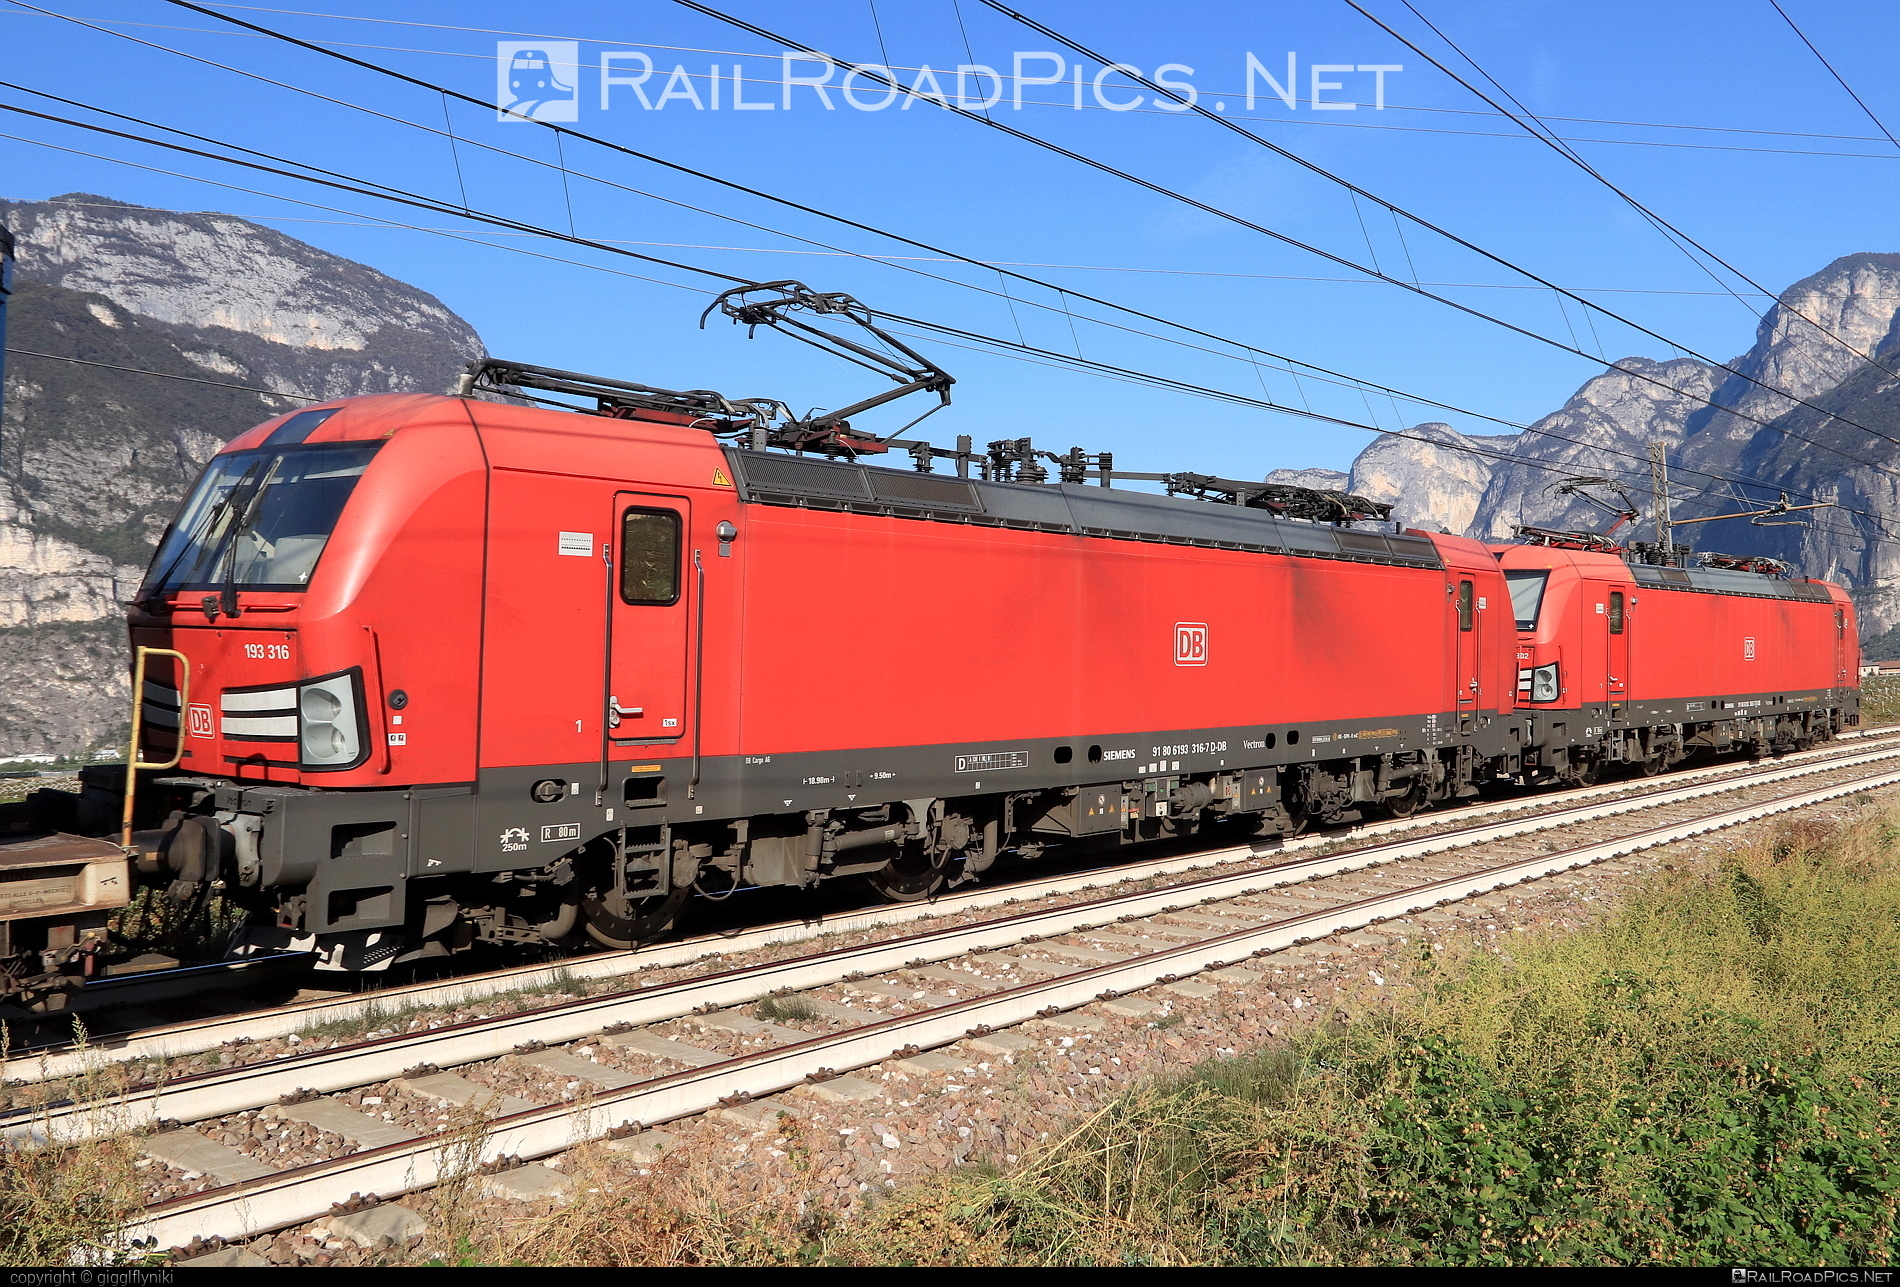 Siemens Vectron MS - 193 316 operated by DB Cargo AG #db #dbcargo #dbcargoag #deutschebahn #siemens #siemensVectron #siemensVectronMS #vectron #vectronMS